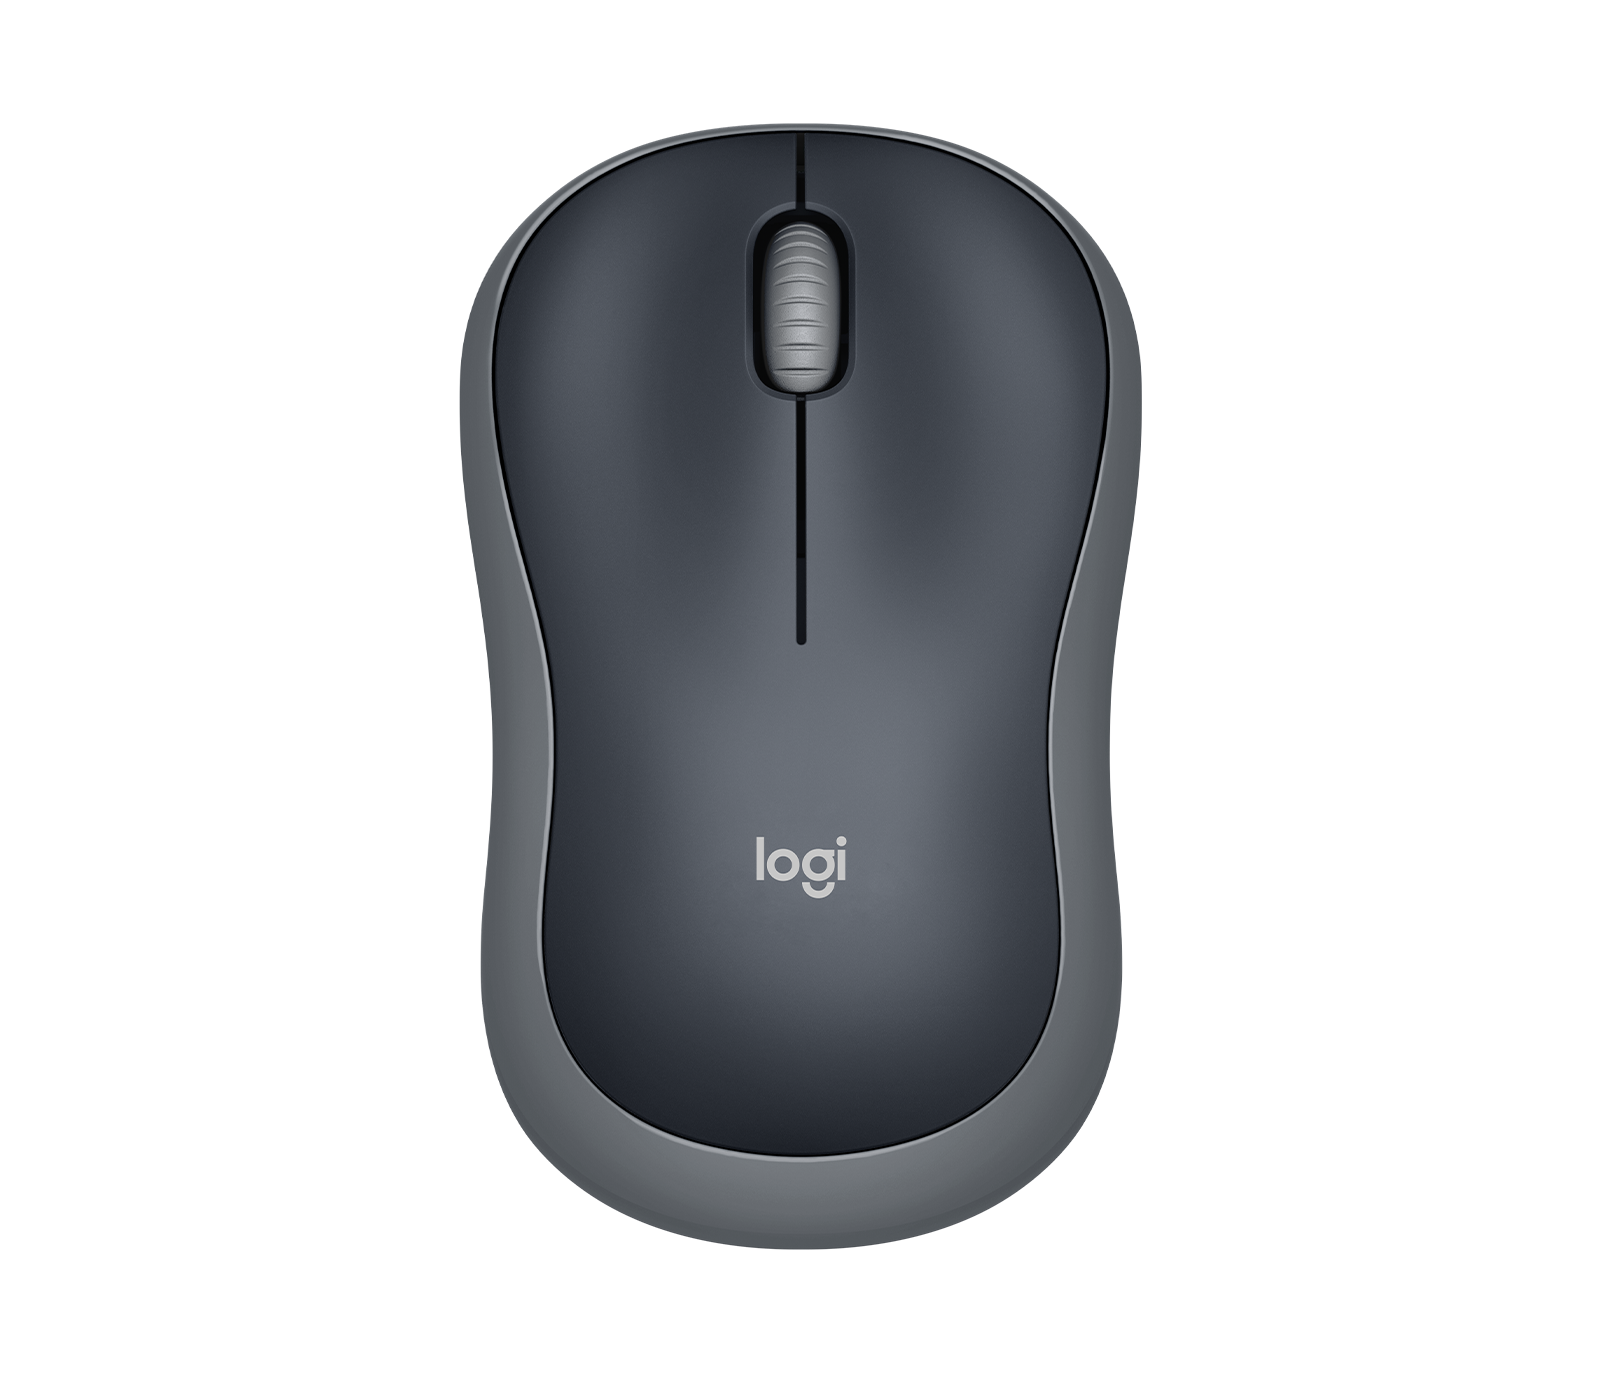 M185 Mouse - Designed for Laptops